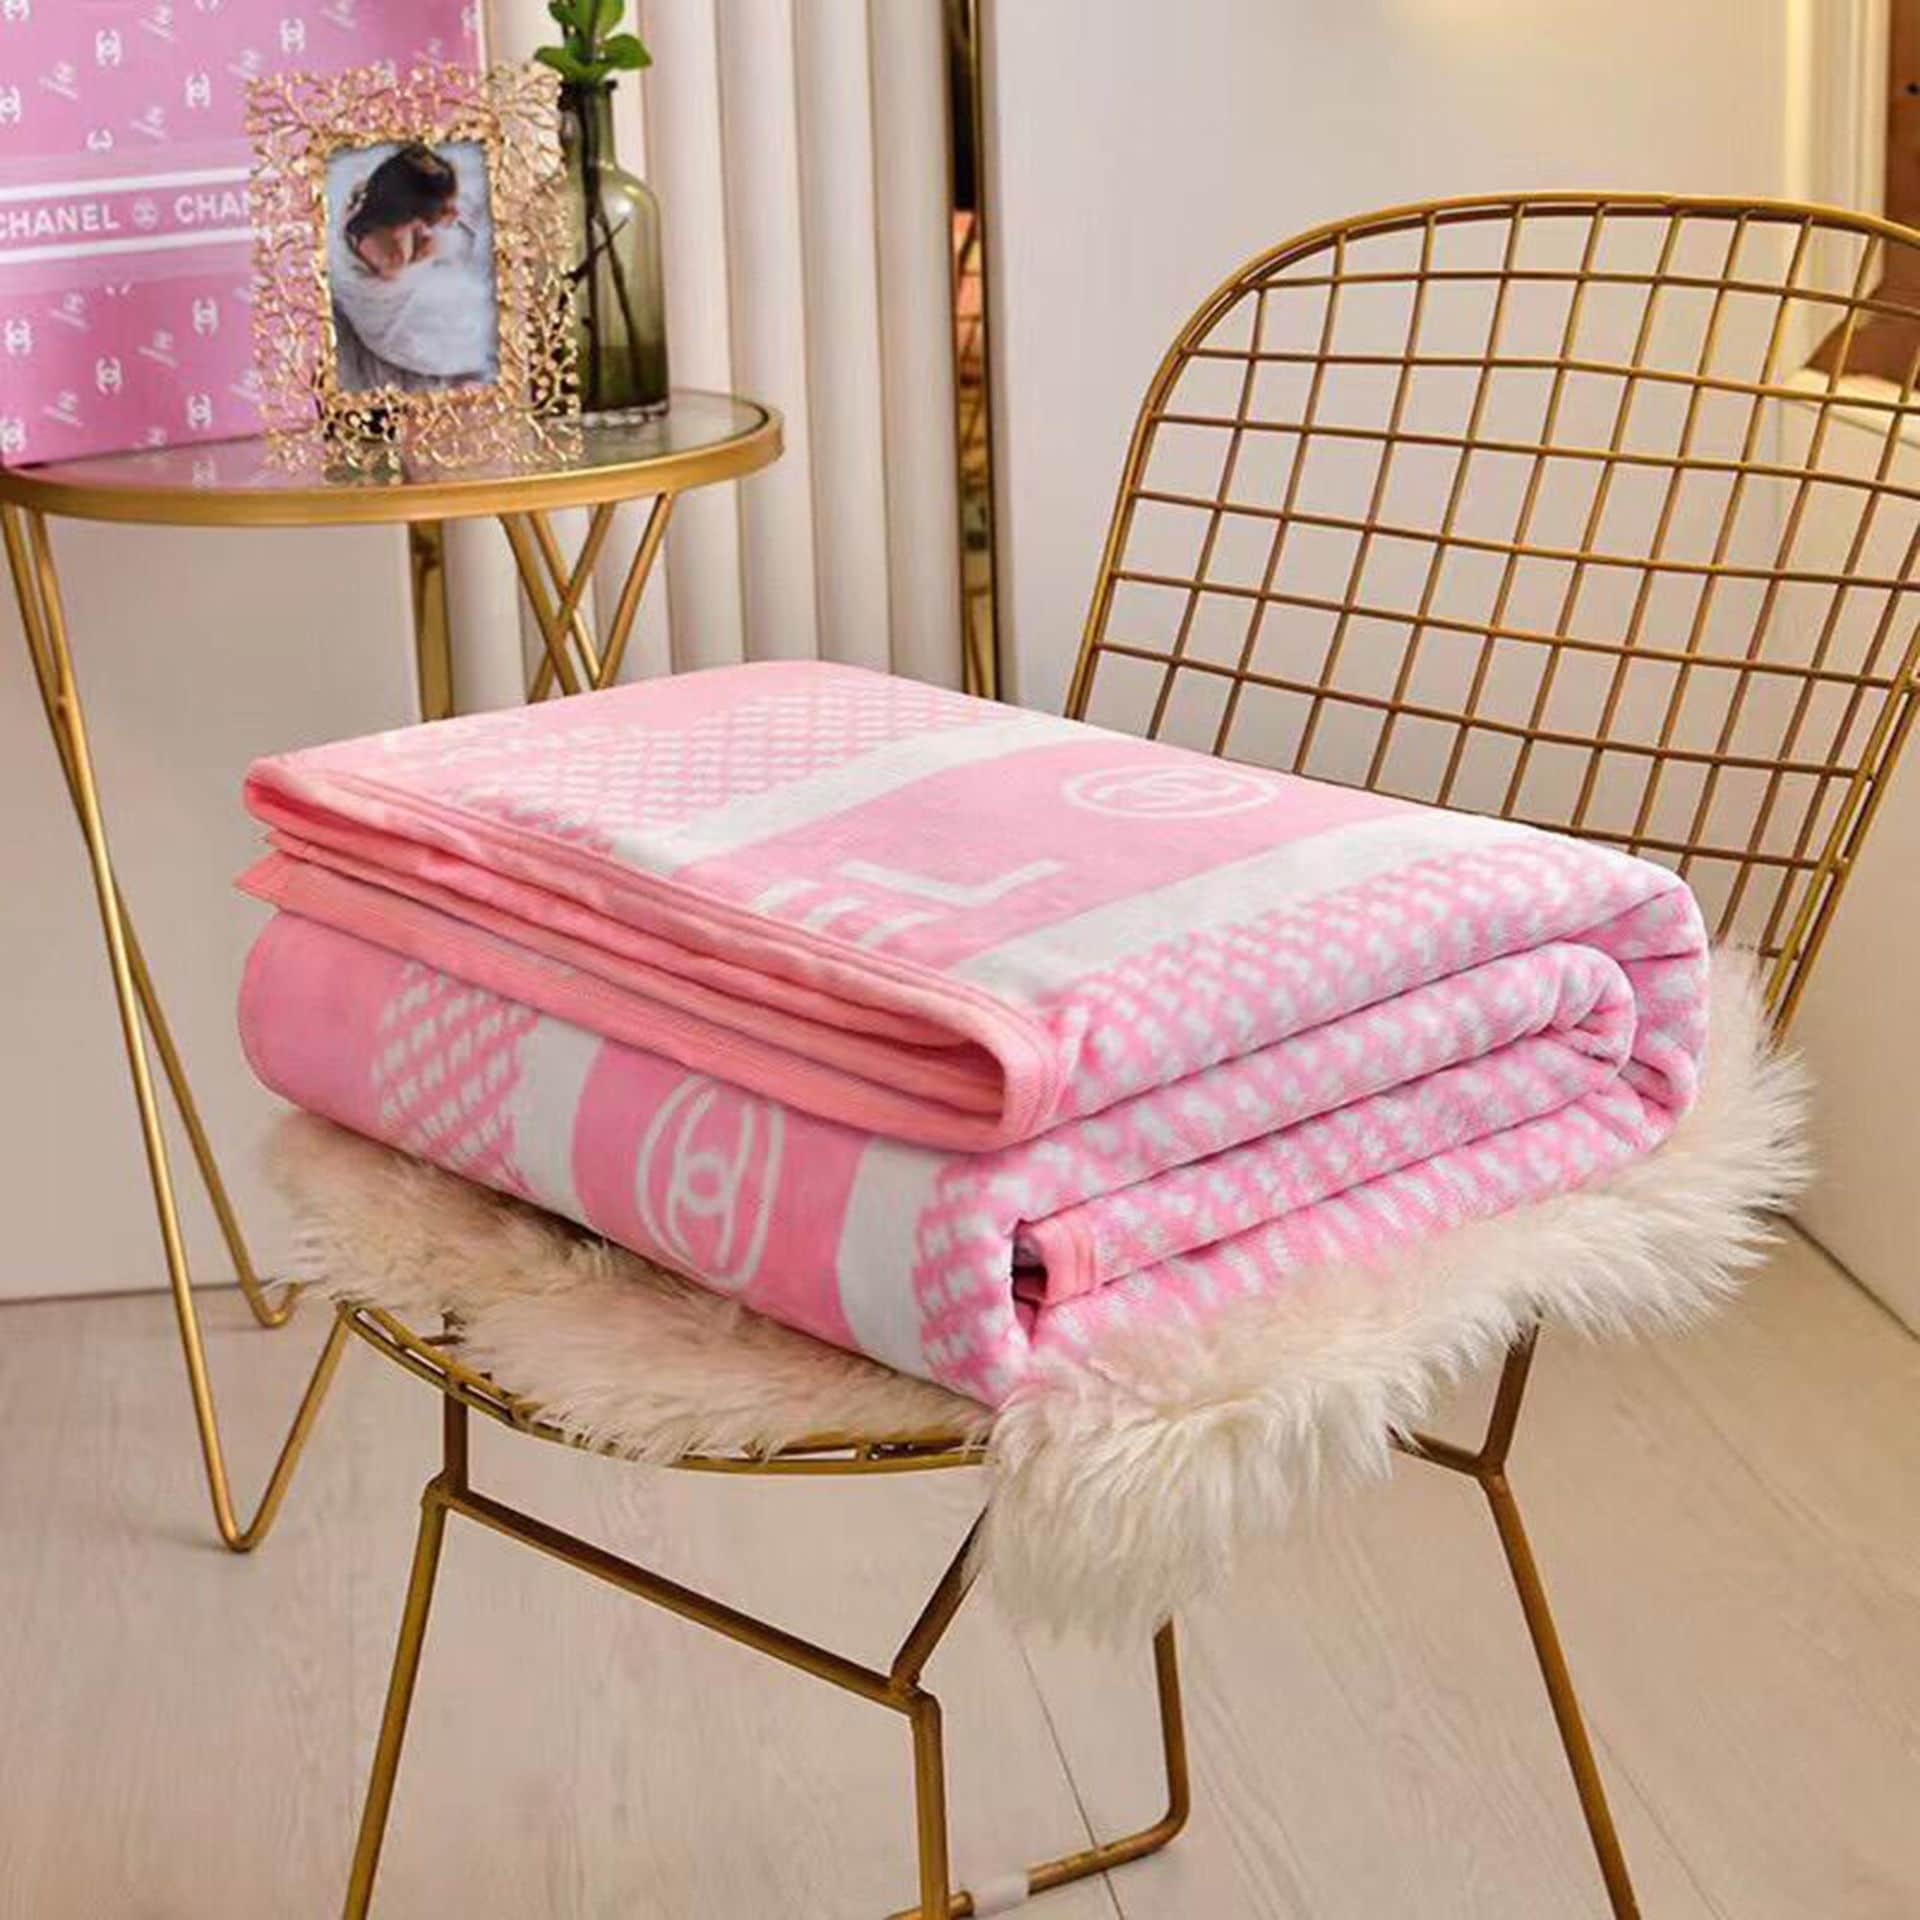 pink chanel throw blanket